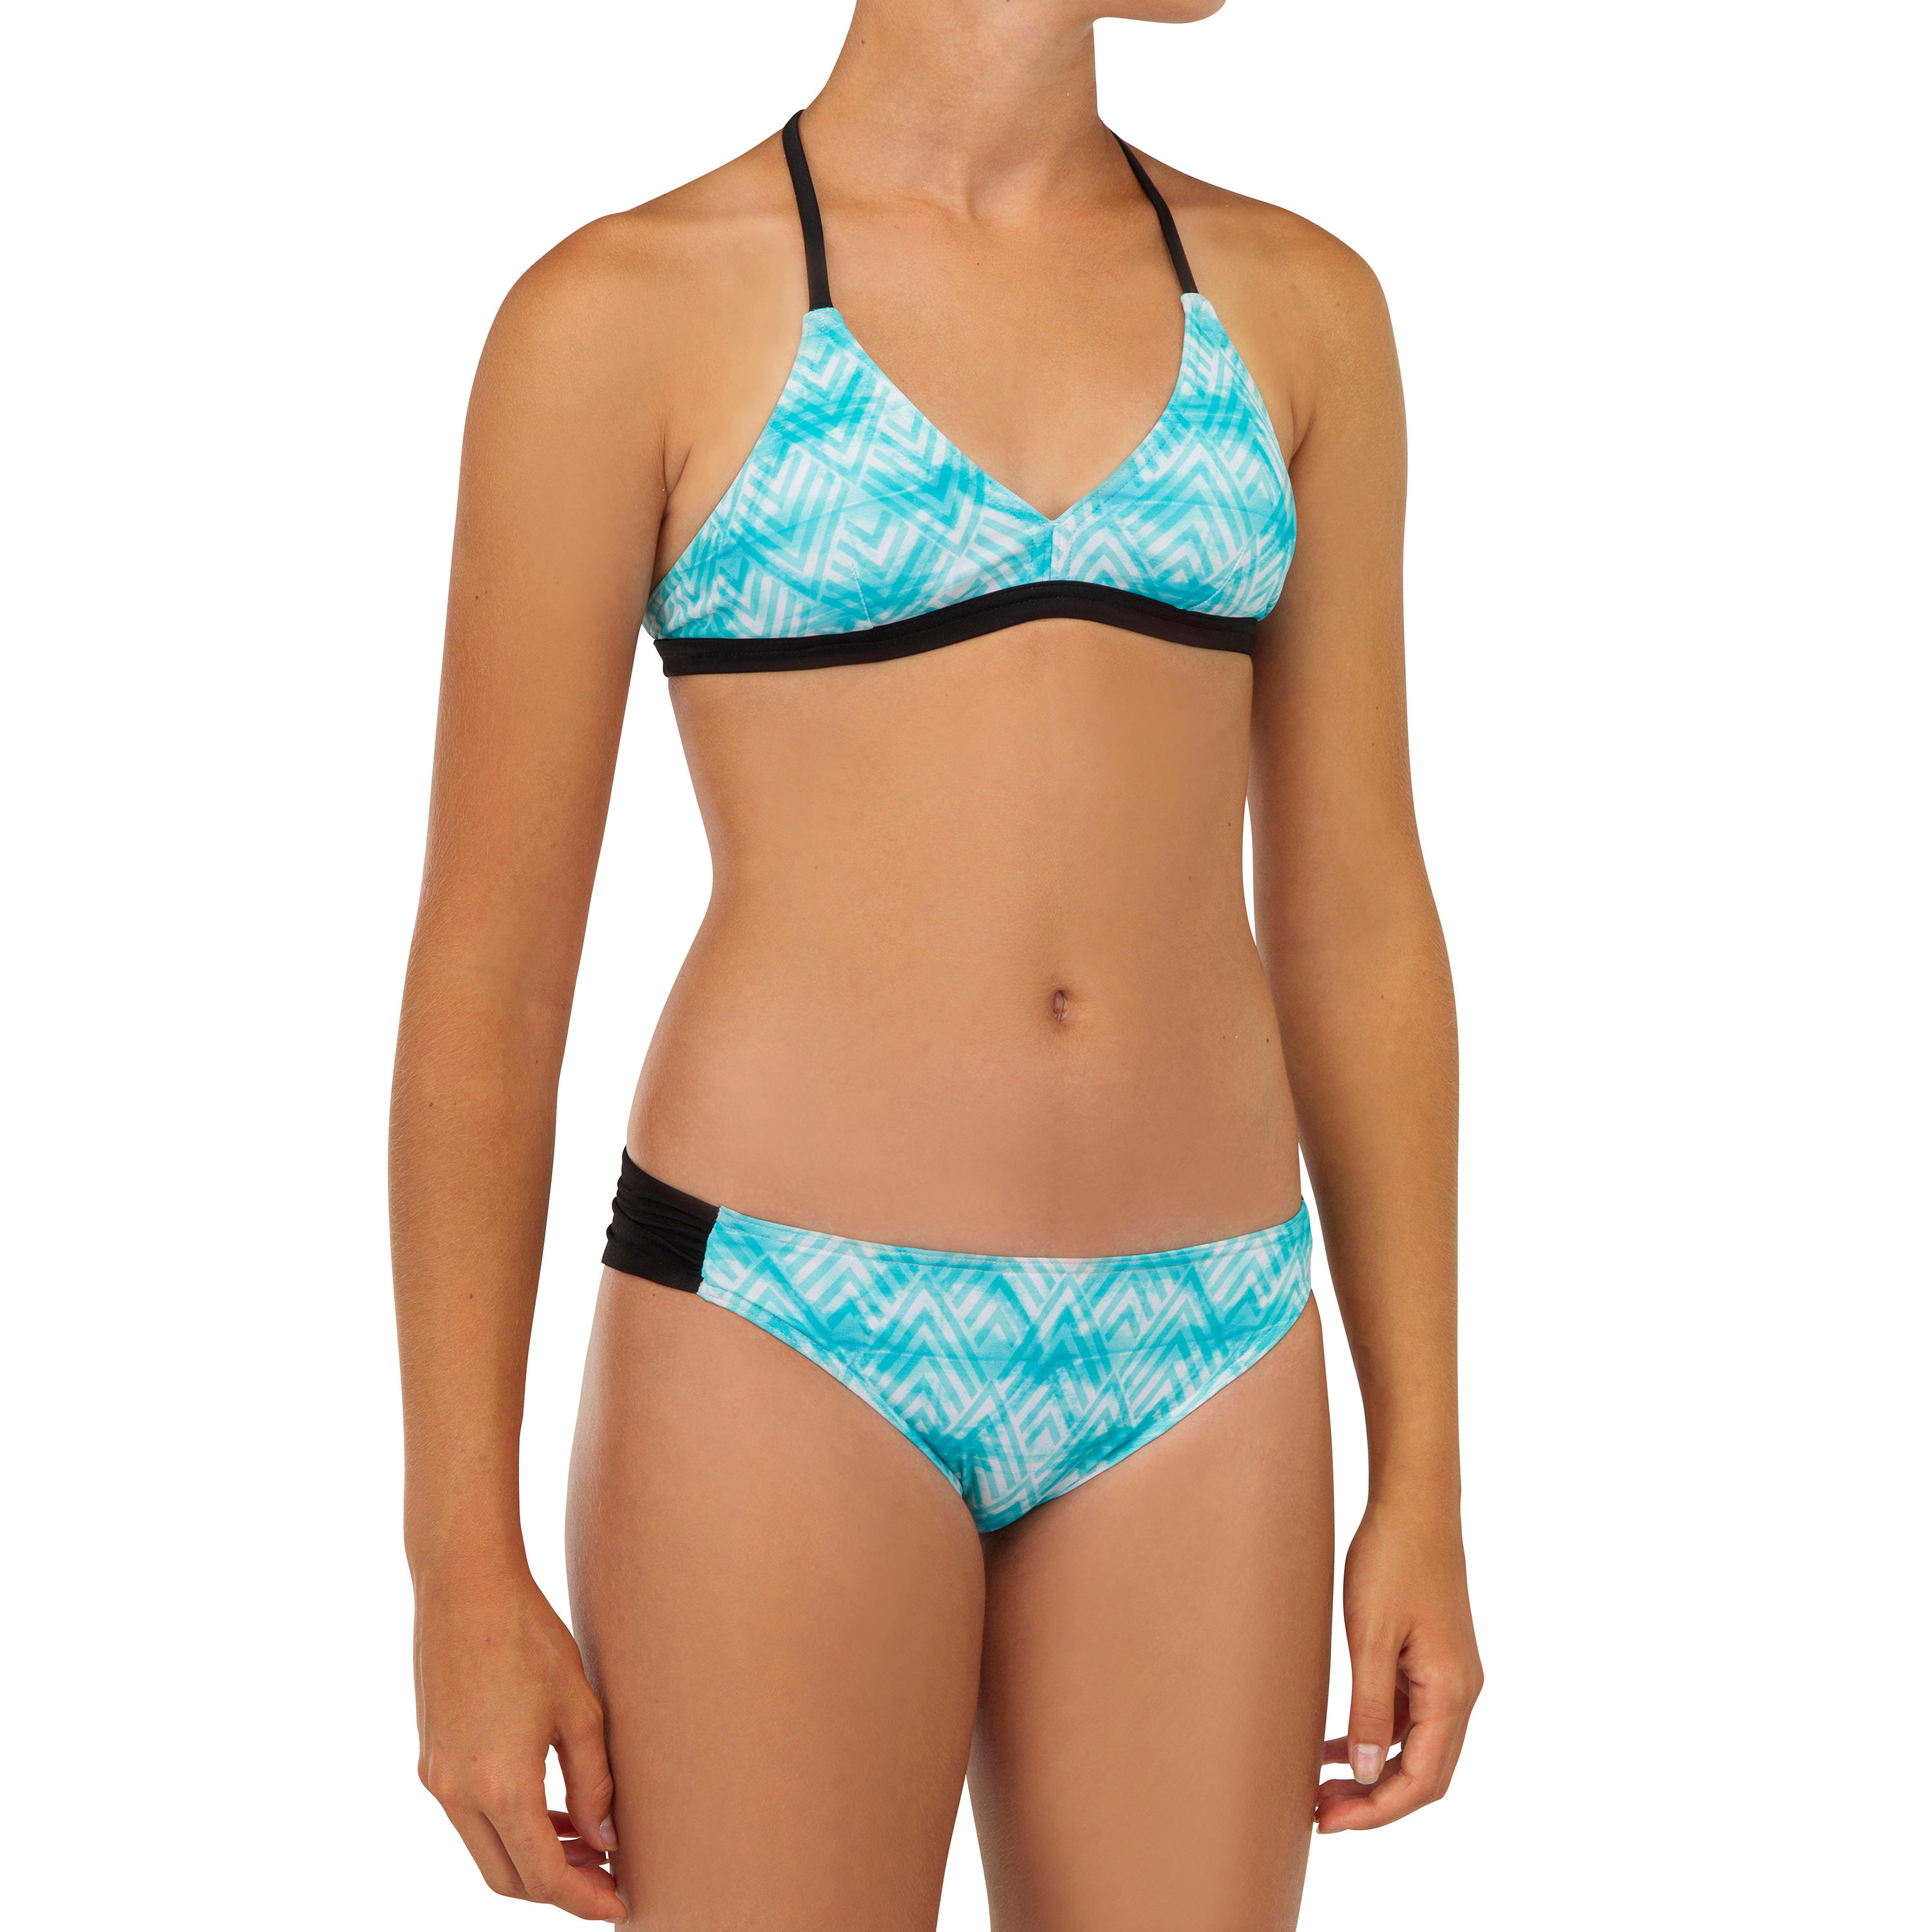 GIRL'S SURF Swimsuit bottoms MALOU 500 - TURQUOISE 4/6